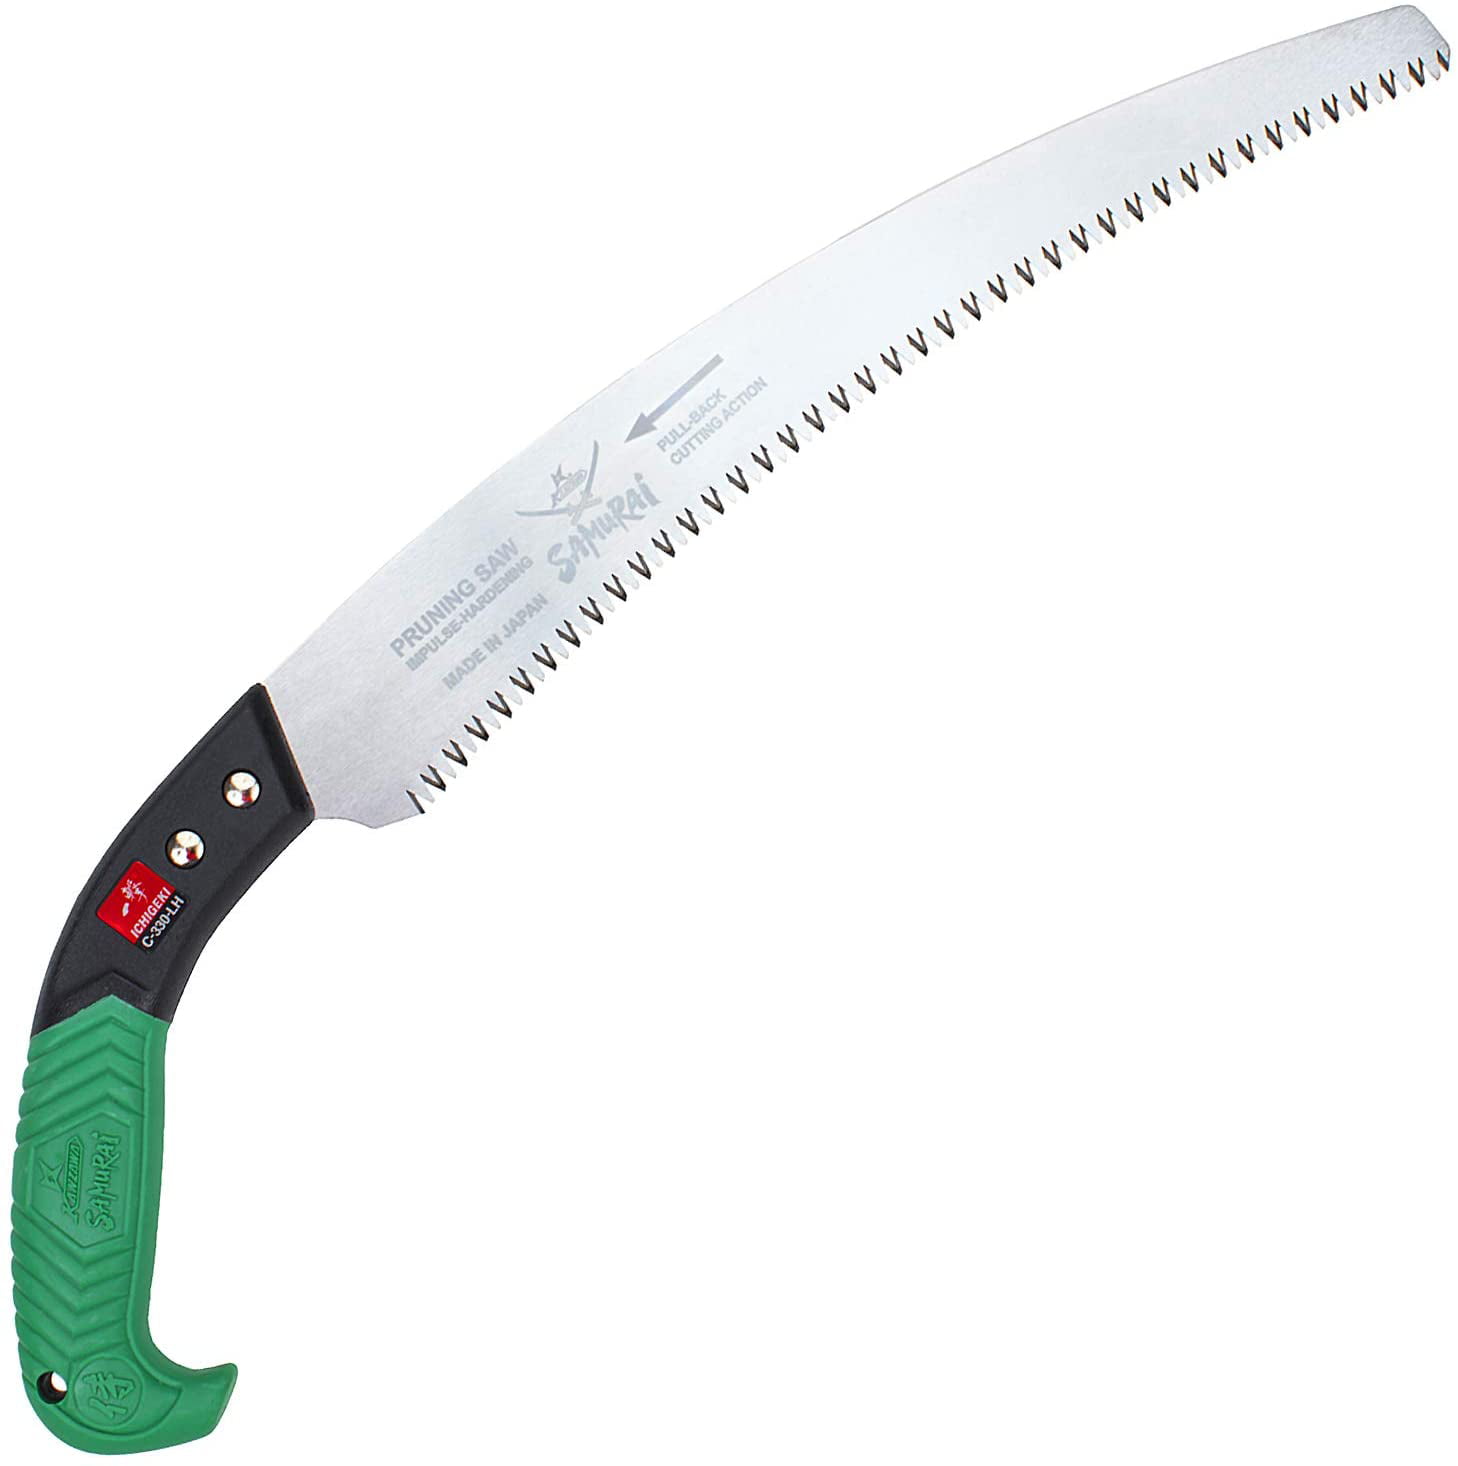 Samurai C-330-LH  Heavy Duty Curved Hand Saw 330mm with  Carrying Case 